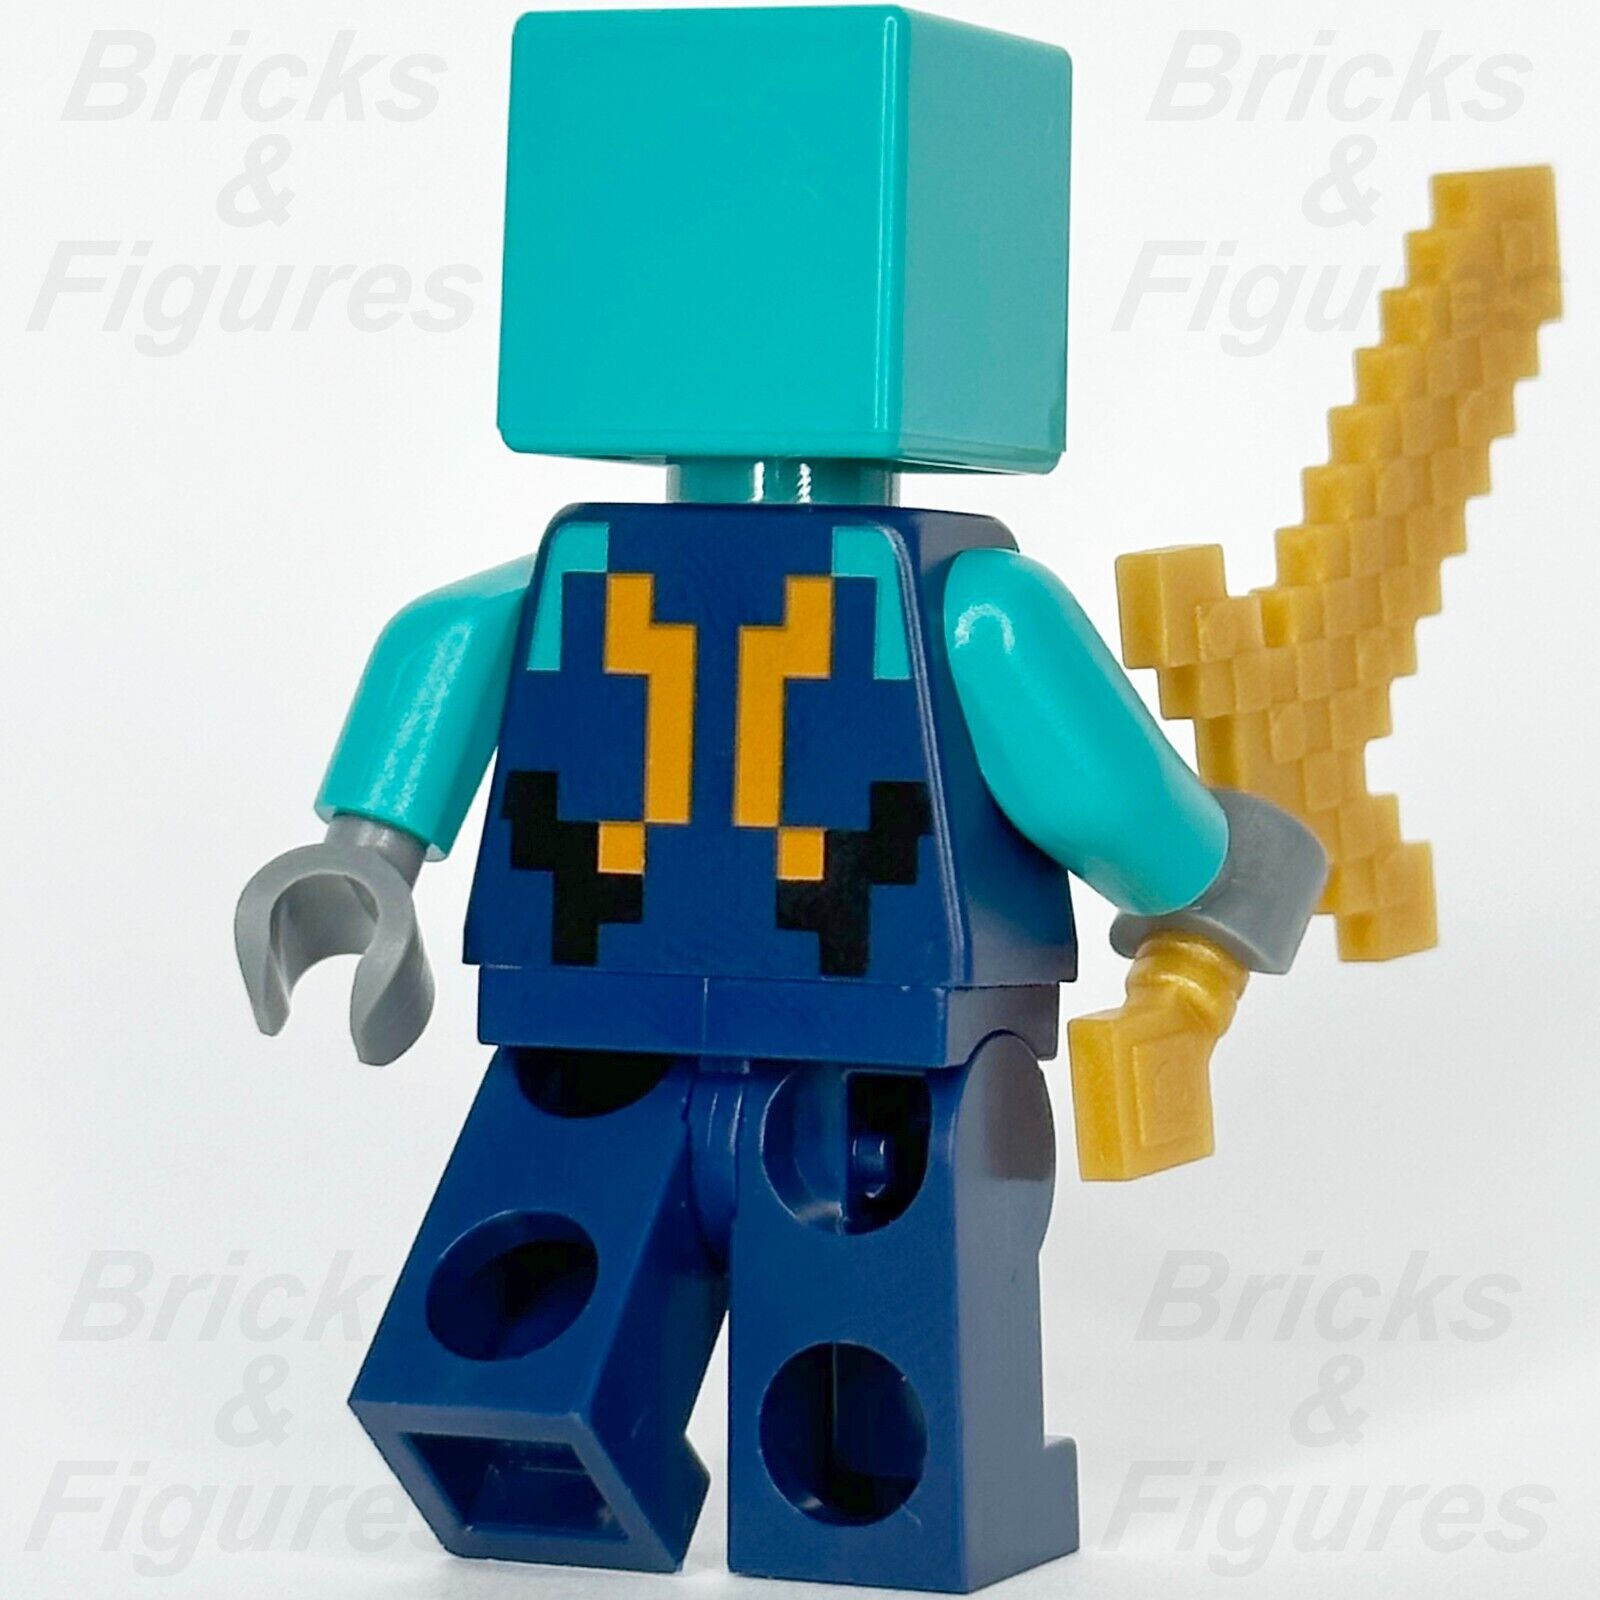 LEGO Minecraft Nether Hero Minifigure with Pearl Gold Sword 662305 min152